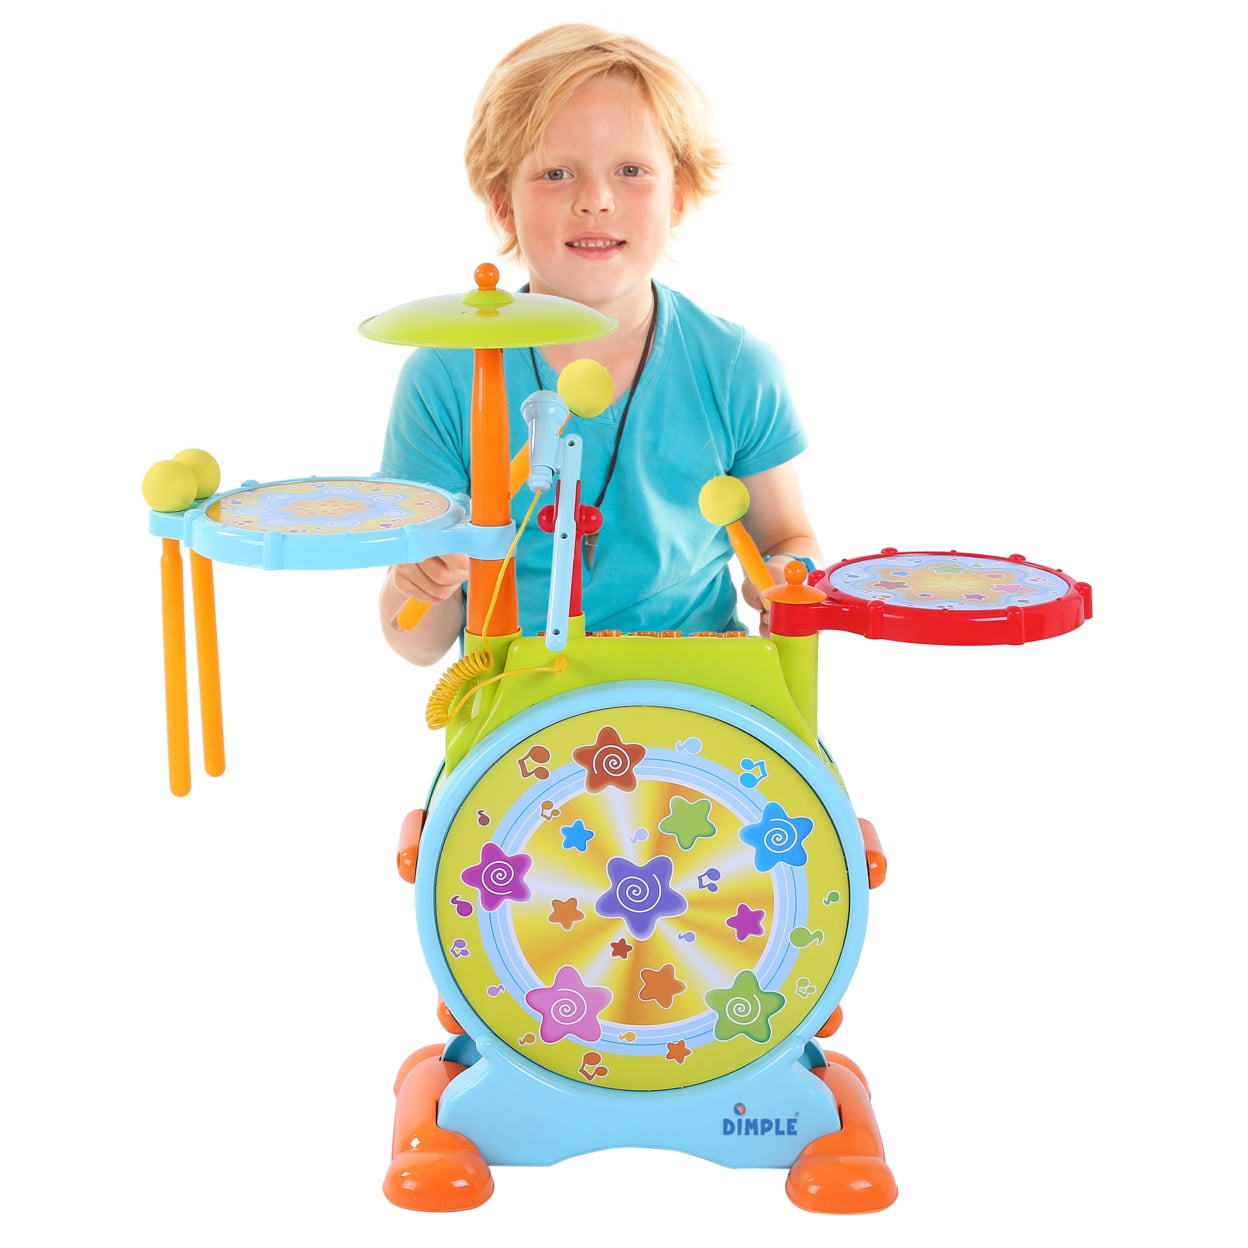  Dimple Kids Handheld Musical Electronic Toy Guitar for